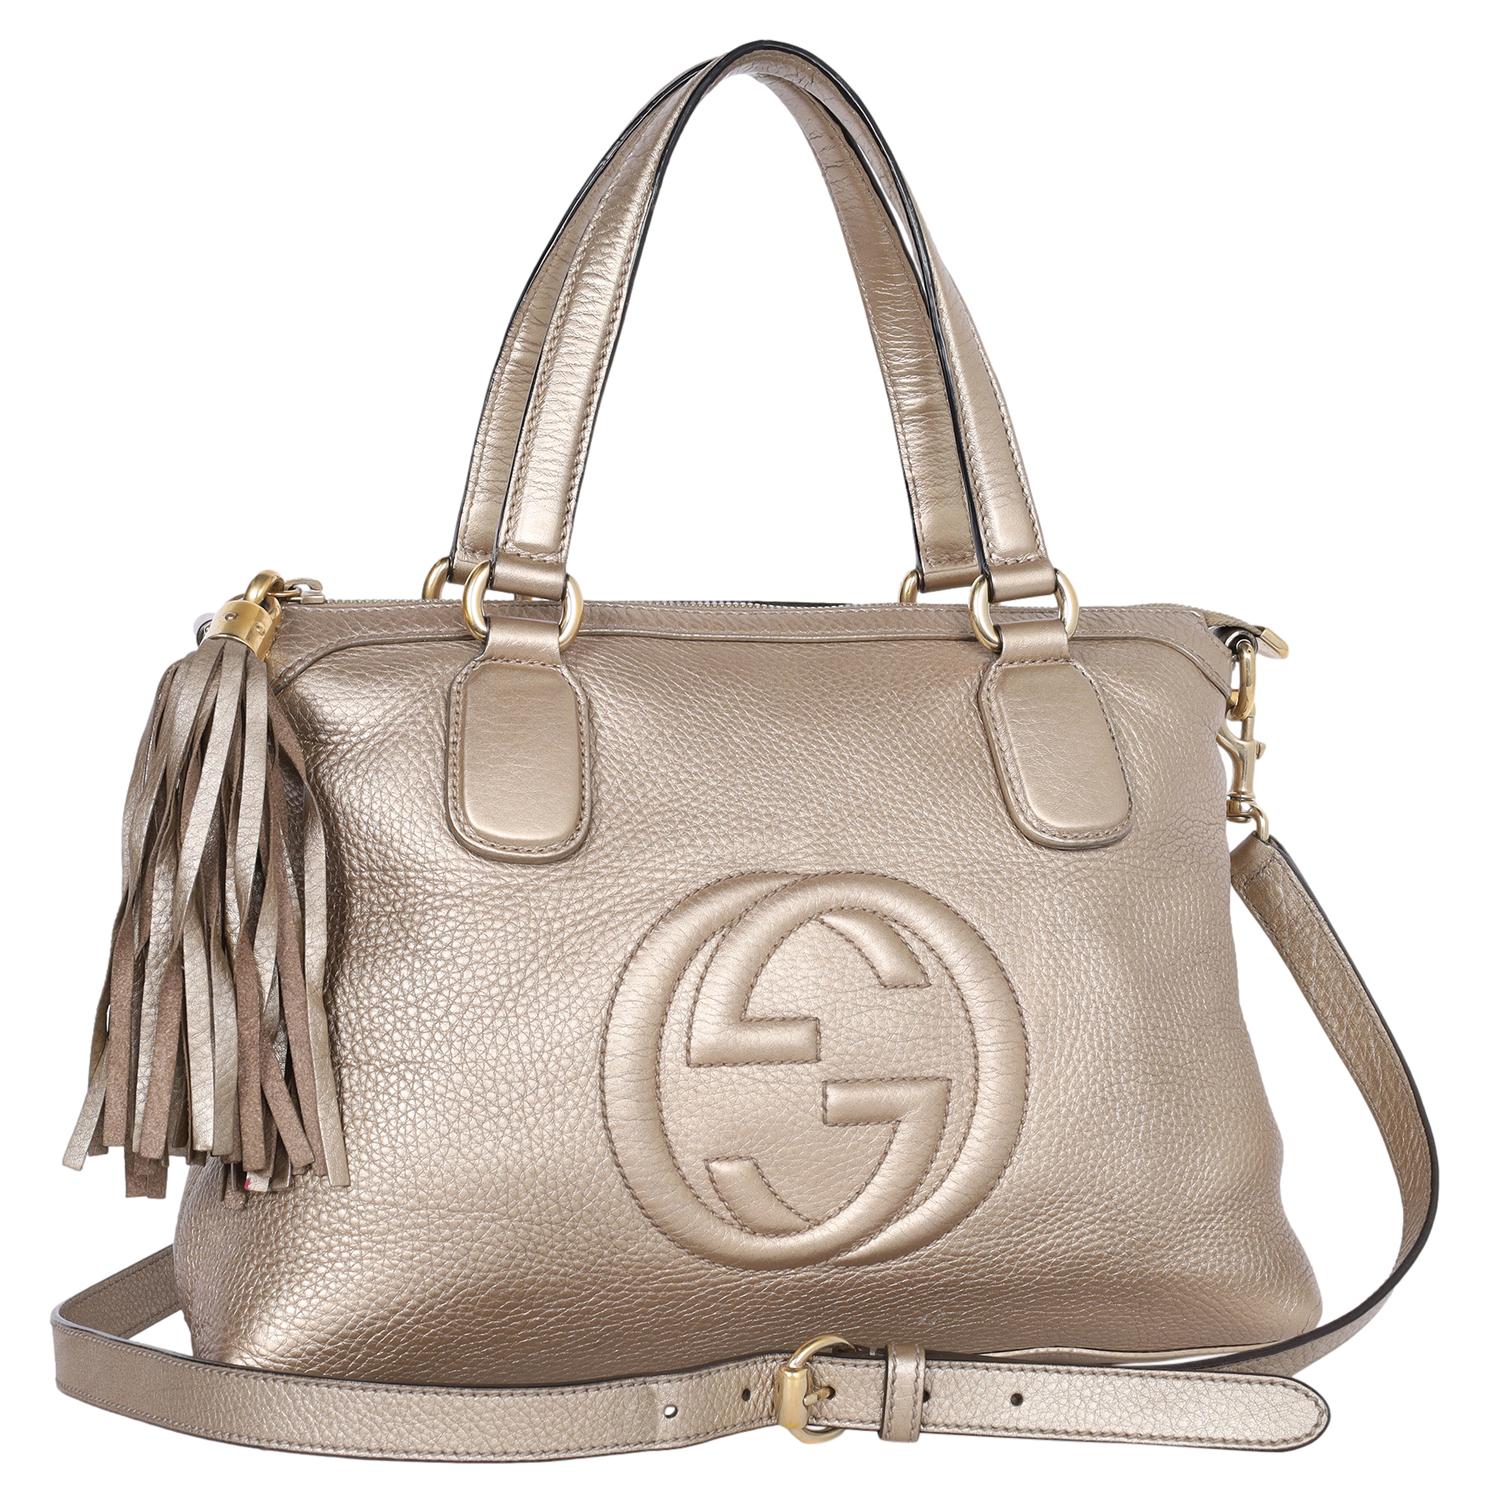 Authentic, pre-owned Gucci GG Soho Gold leather cross body bag. This classic Gucci  leather cross body bag makes a perfect everyday bag. Features GG logo on the front, zipper top closure with fringe pull tab, roomy interior with zipper pocket and 2